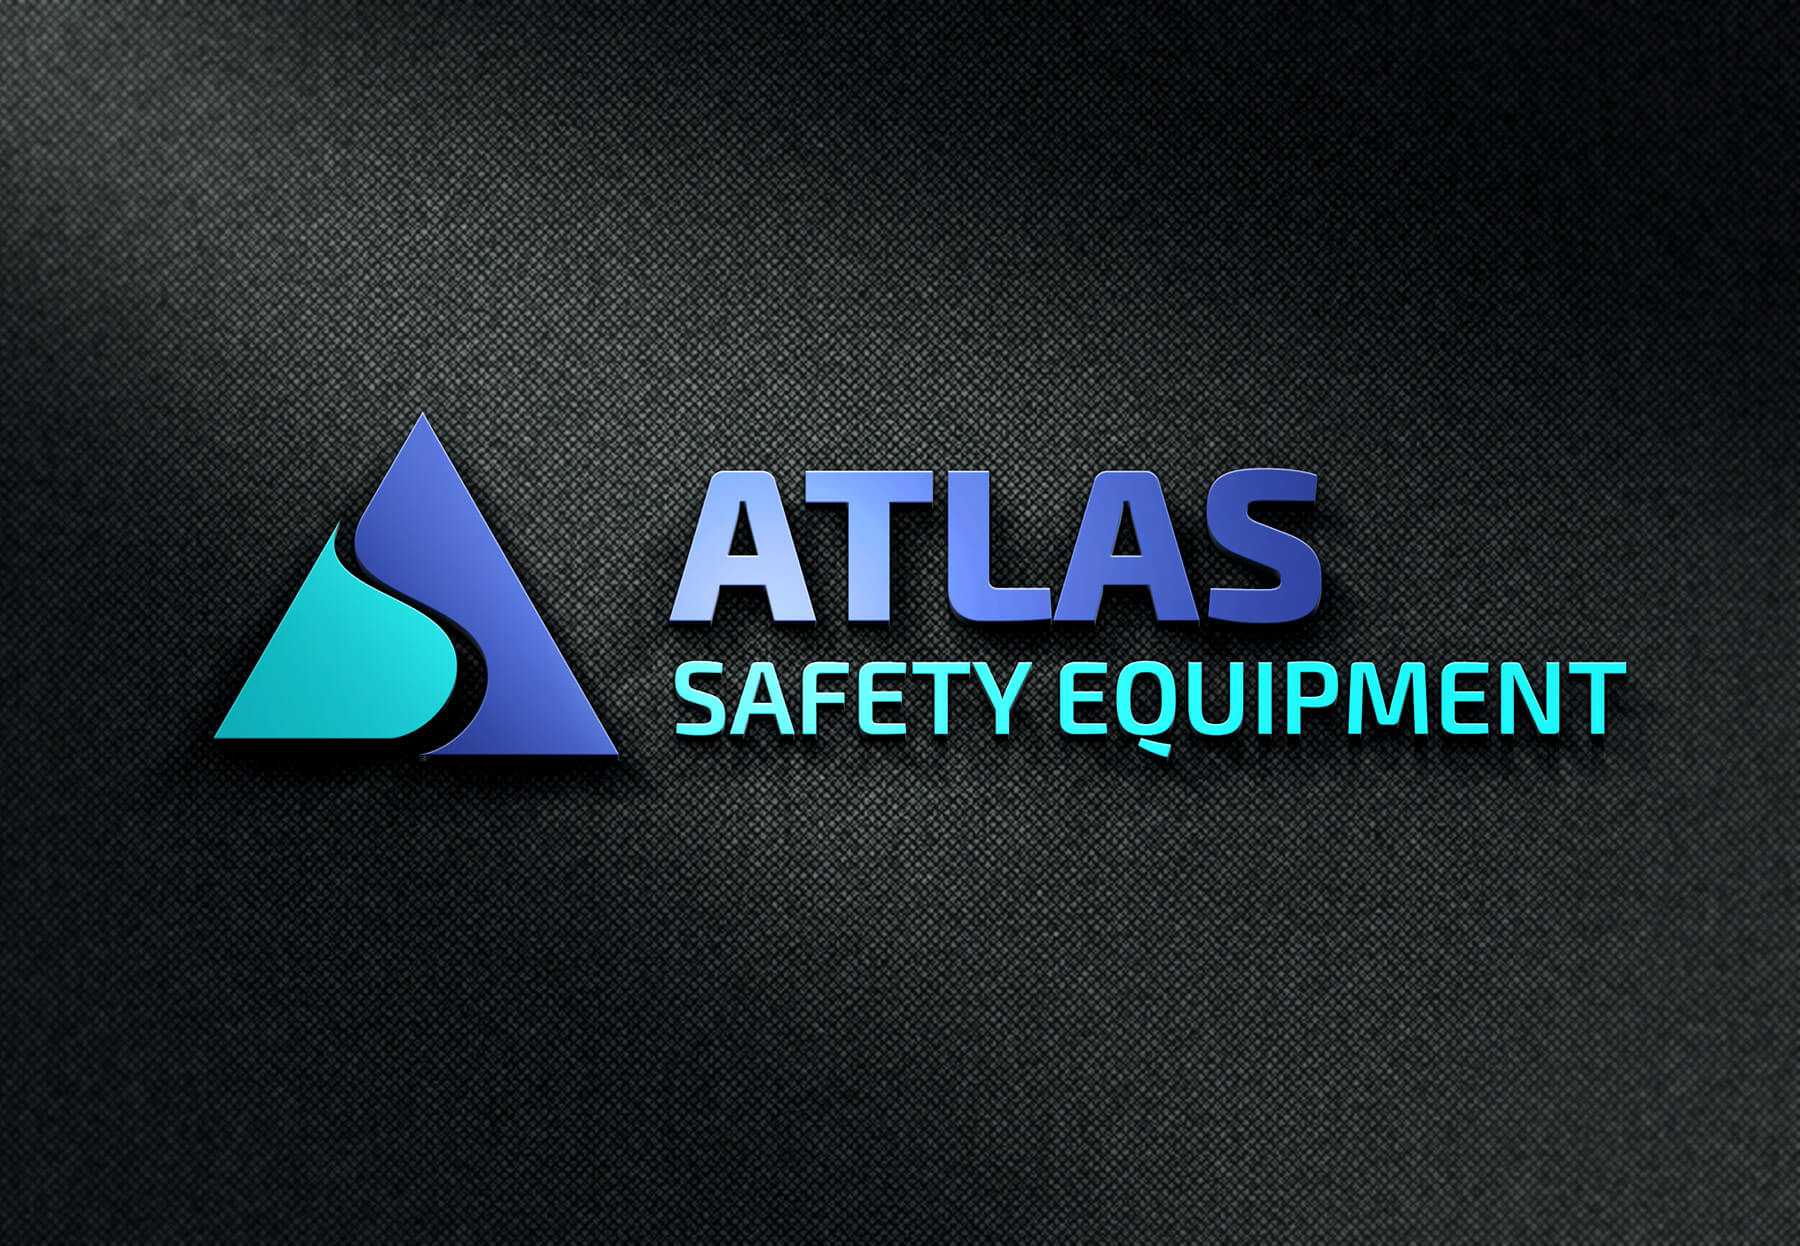 ATLAS Safety Equipment - Designs by CR8VE designs Perth